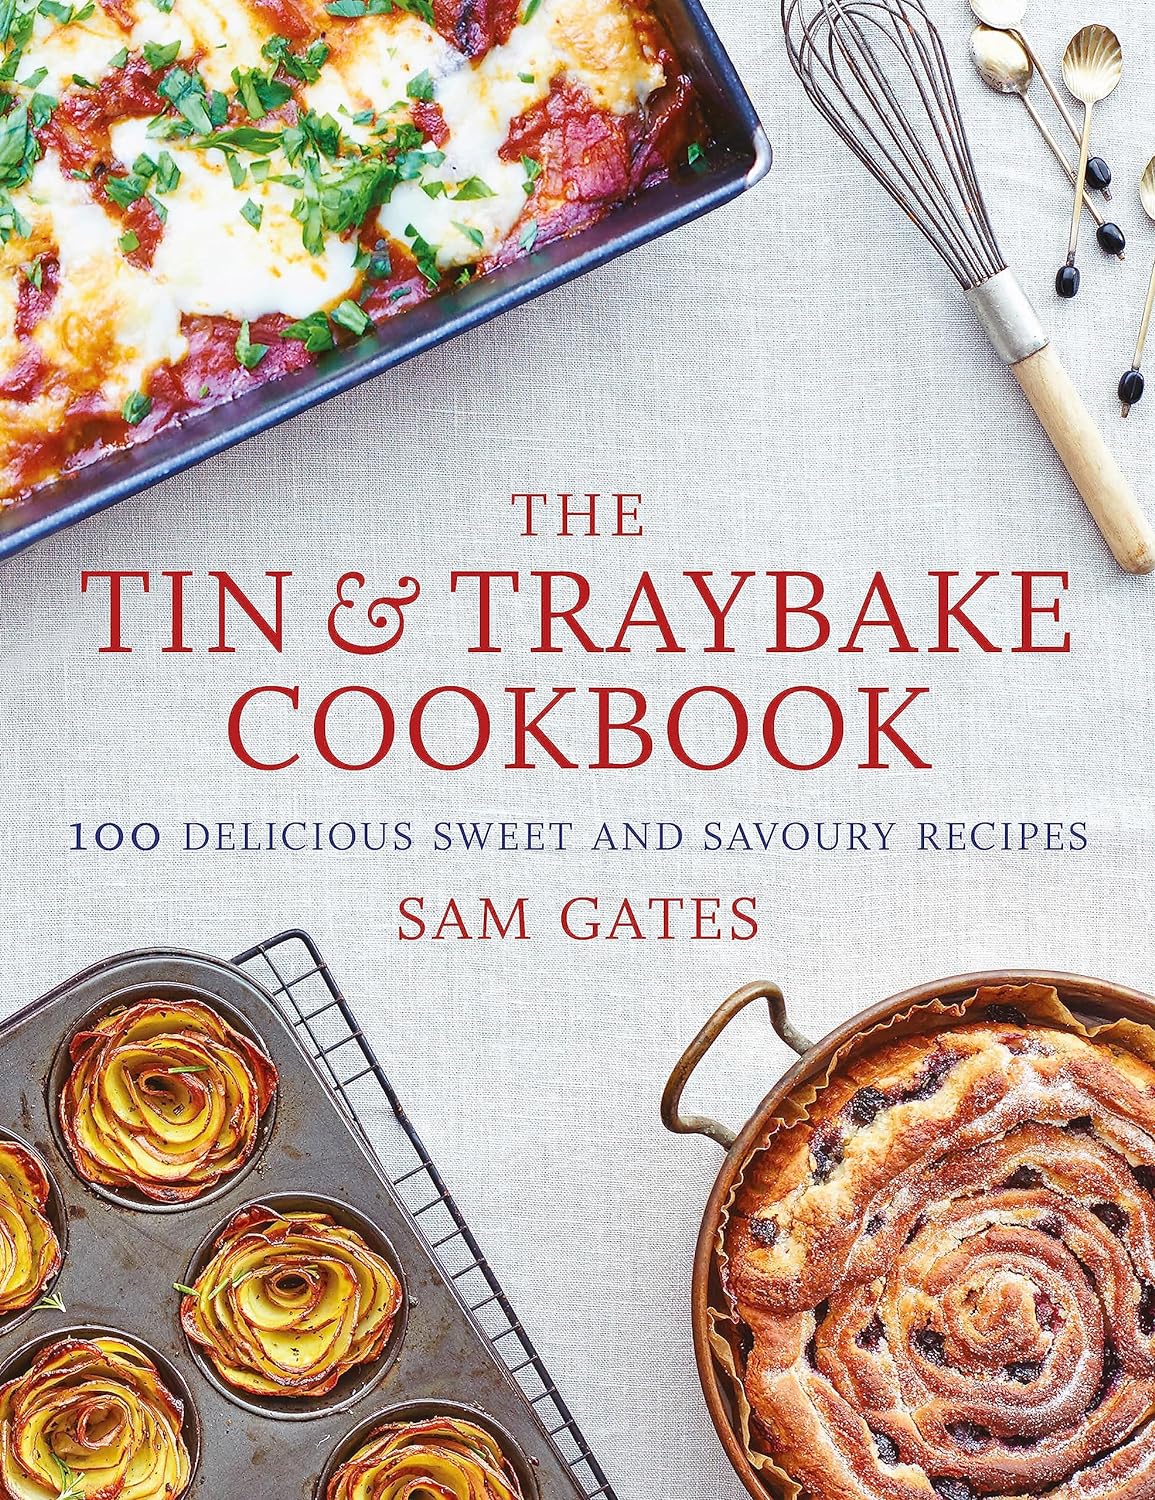 The Tin & Traybake Cookbook: 100 delicious sweet and savoury recipes